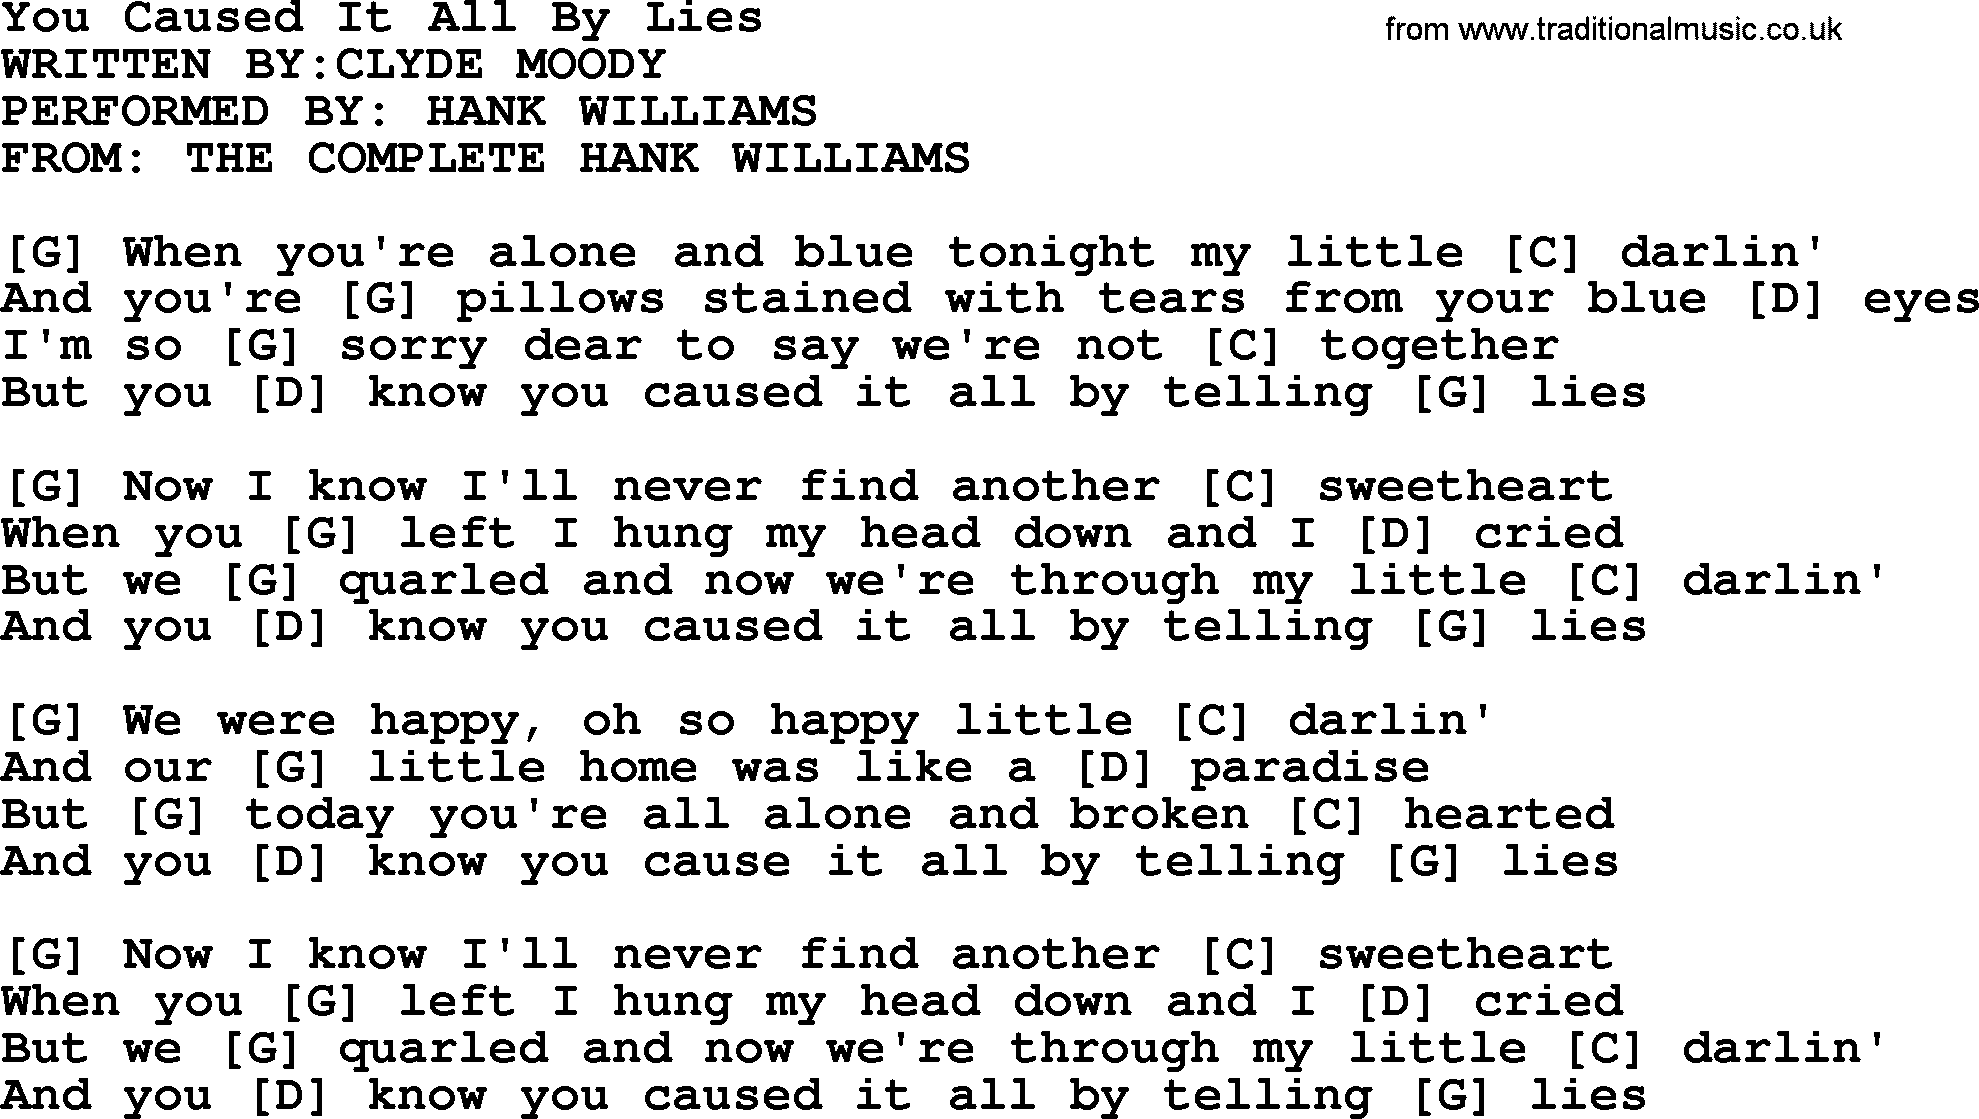 Hank Williams song You Caused It All By Lies, lyrics and chords